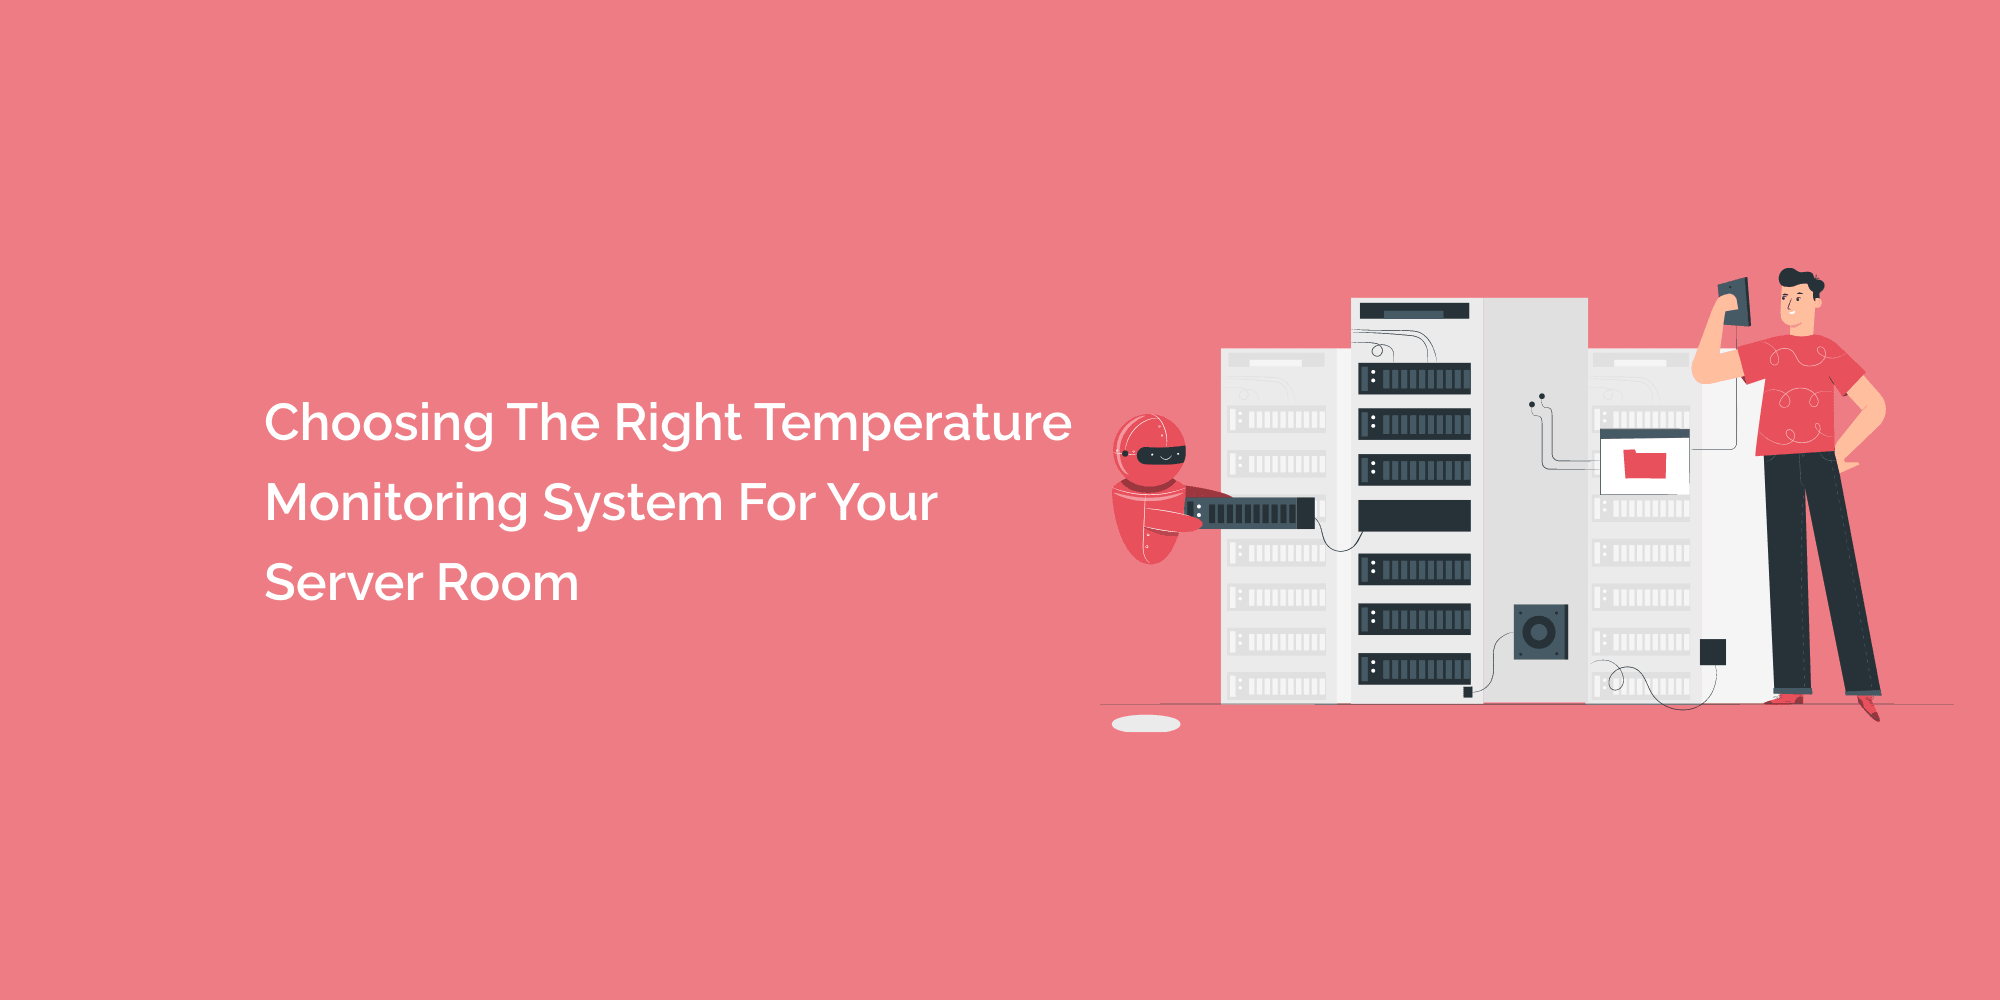 Choosing the Right Temperature Monitoring System for Your Server Room